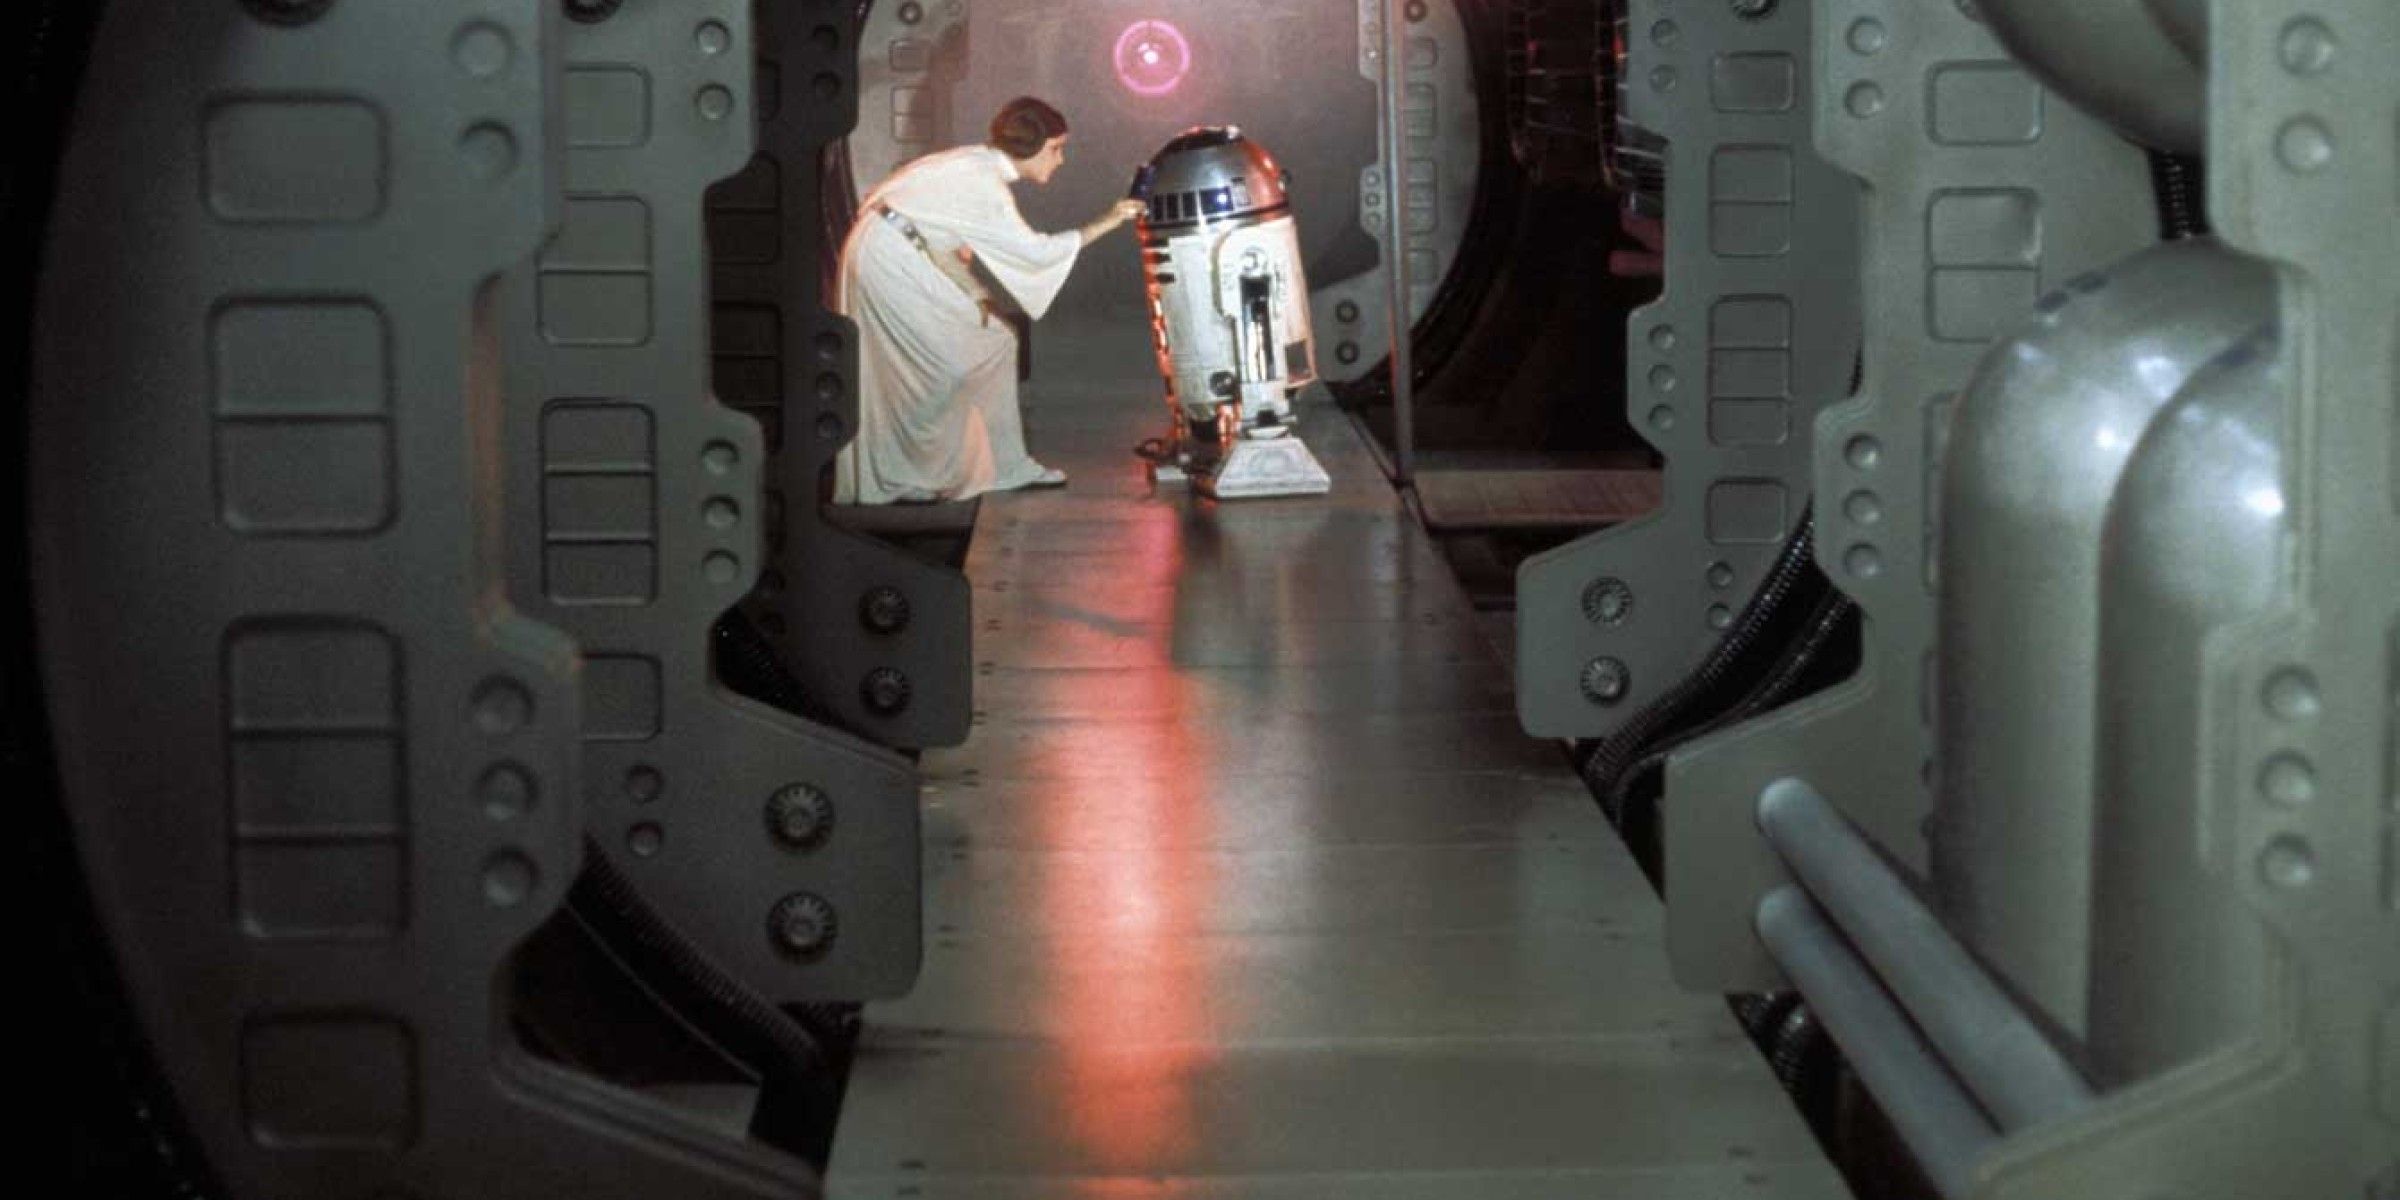 Leia giving R2-D2 the Death Star plans in Star Wars